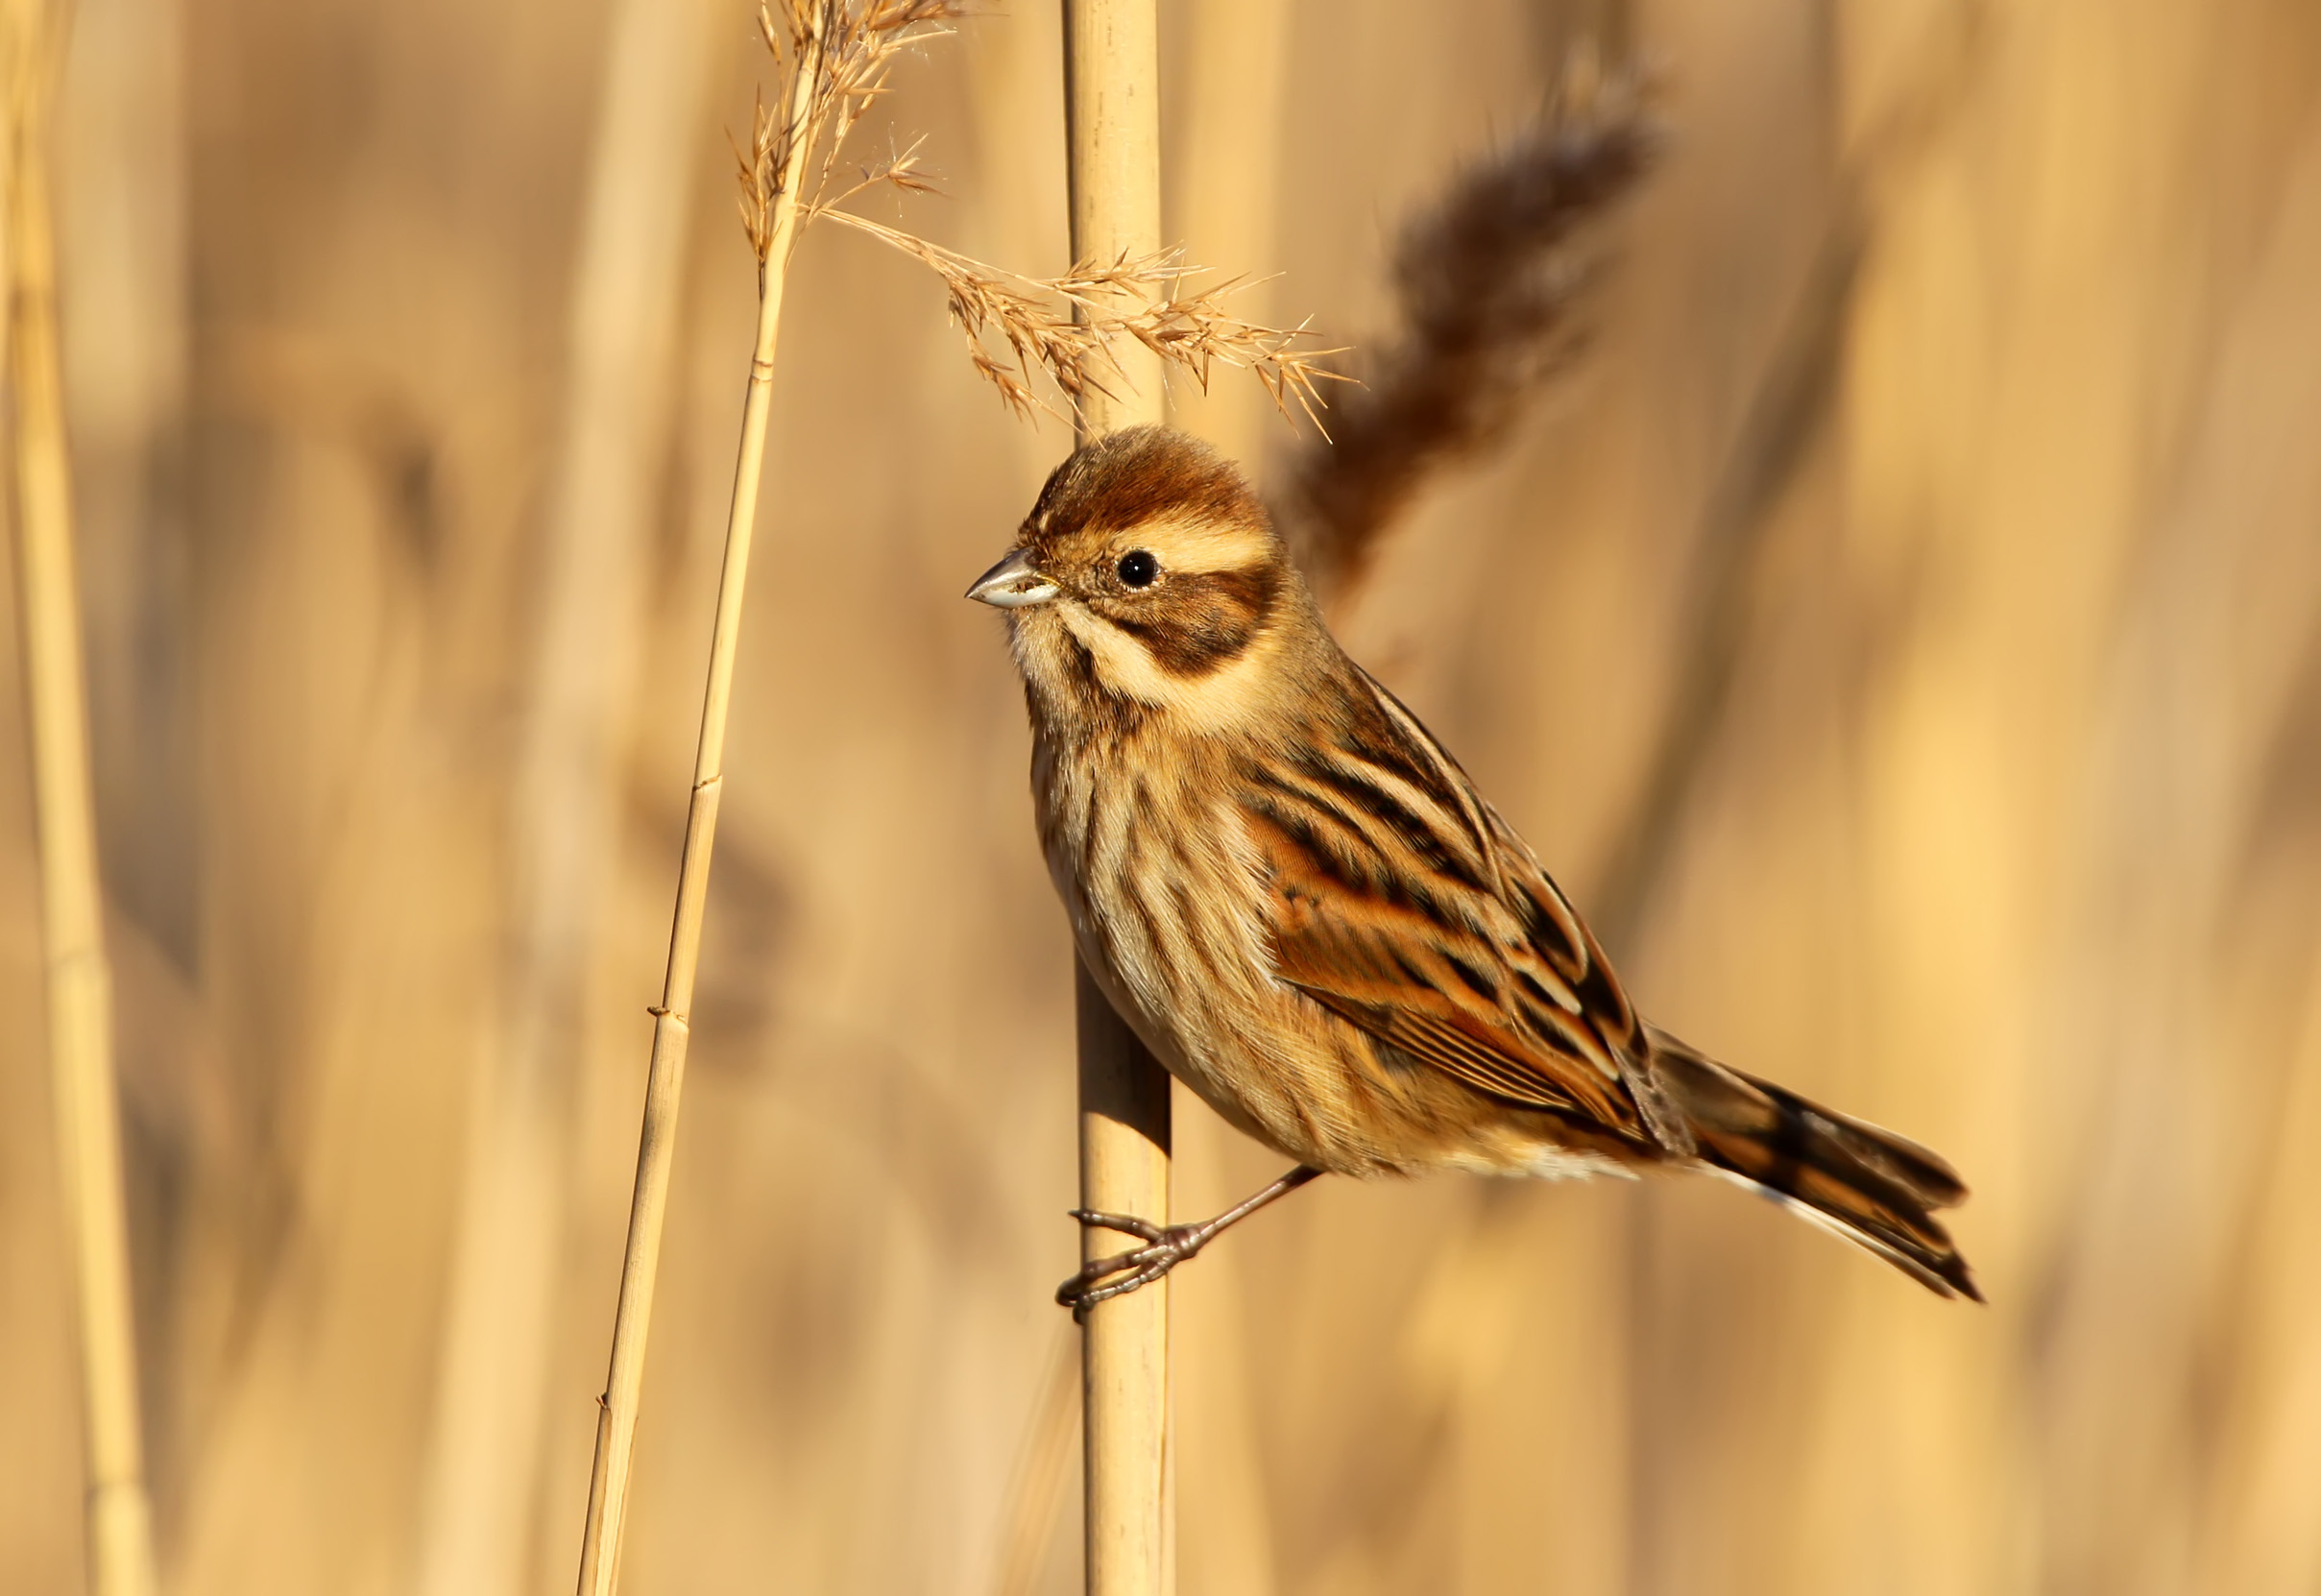 A female Reed Bunting perched on a reed basking in the warm sunlight.